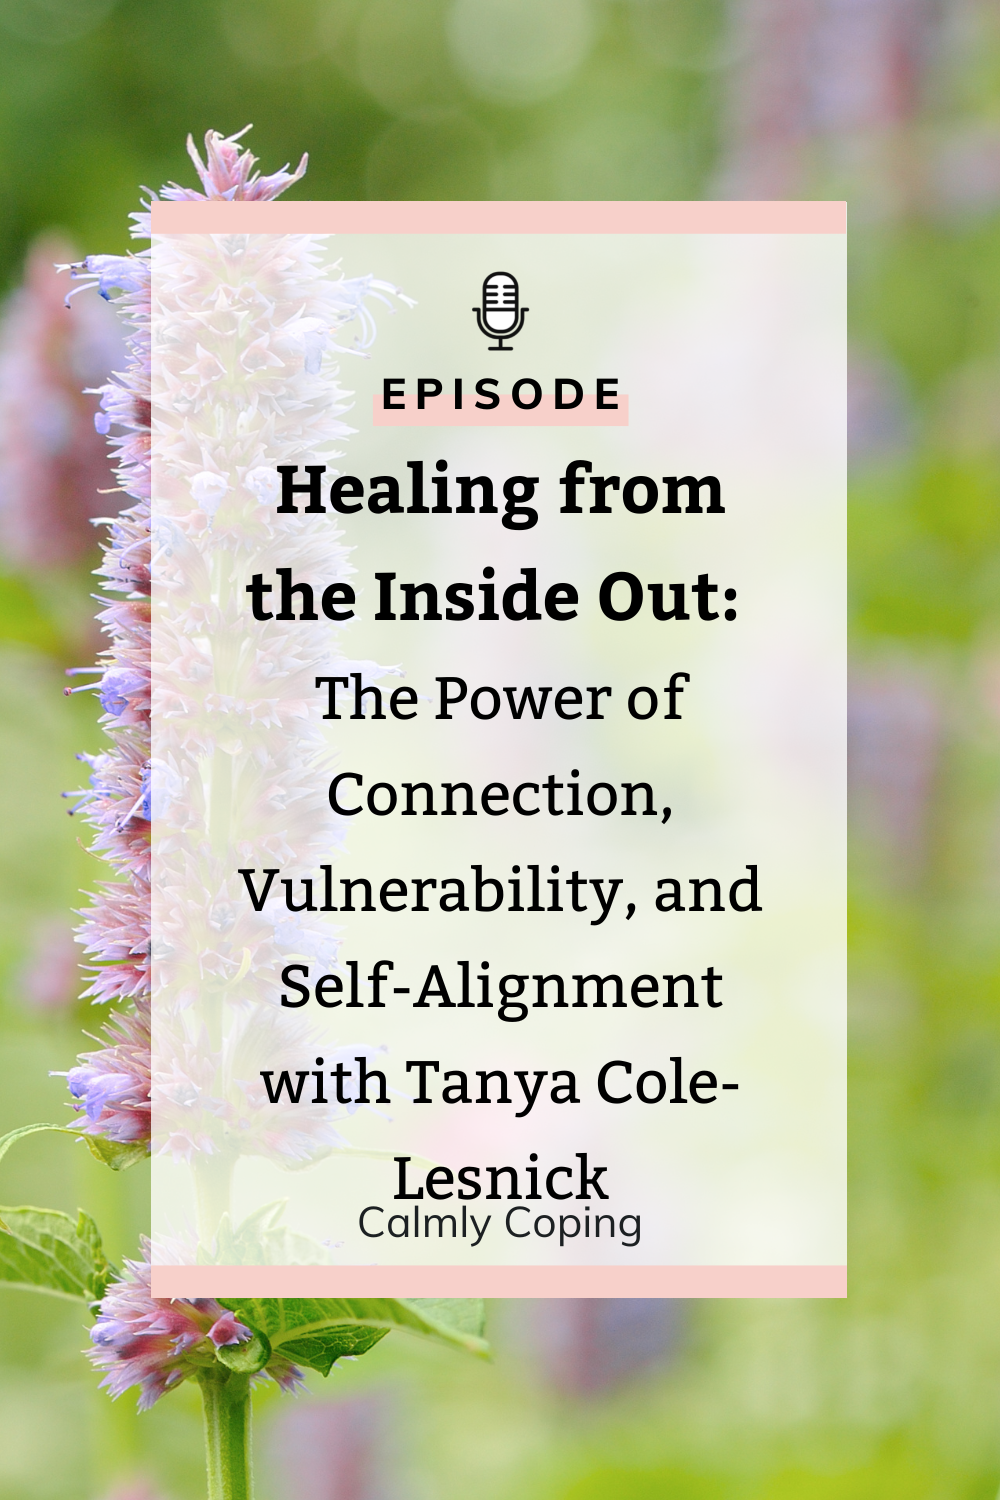 Healing from the Inside Out: The Power of Connection, Vulnerability, and Self-Alignment with Tanya Cole-Lesnick